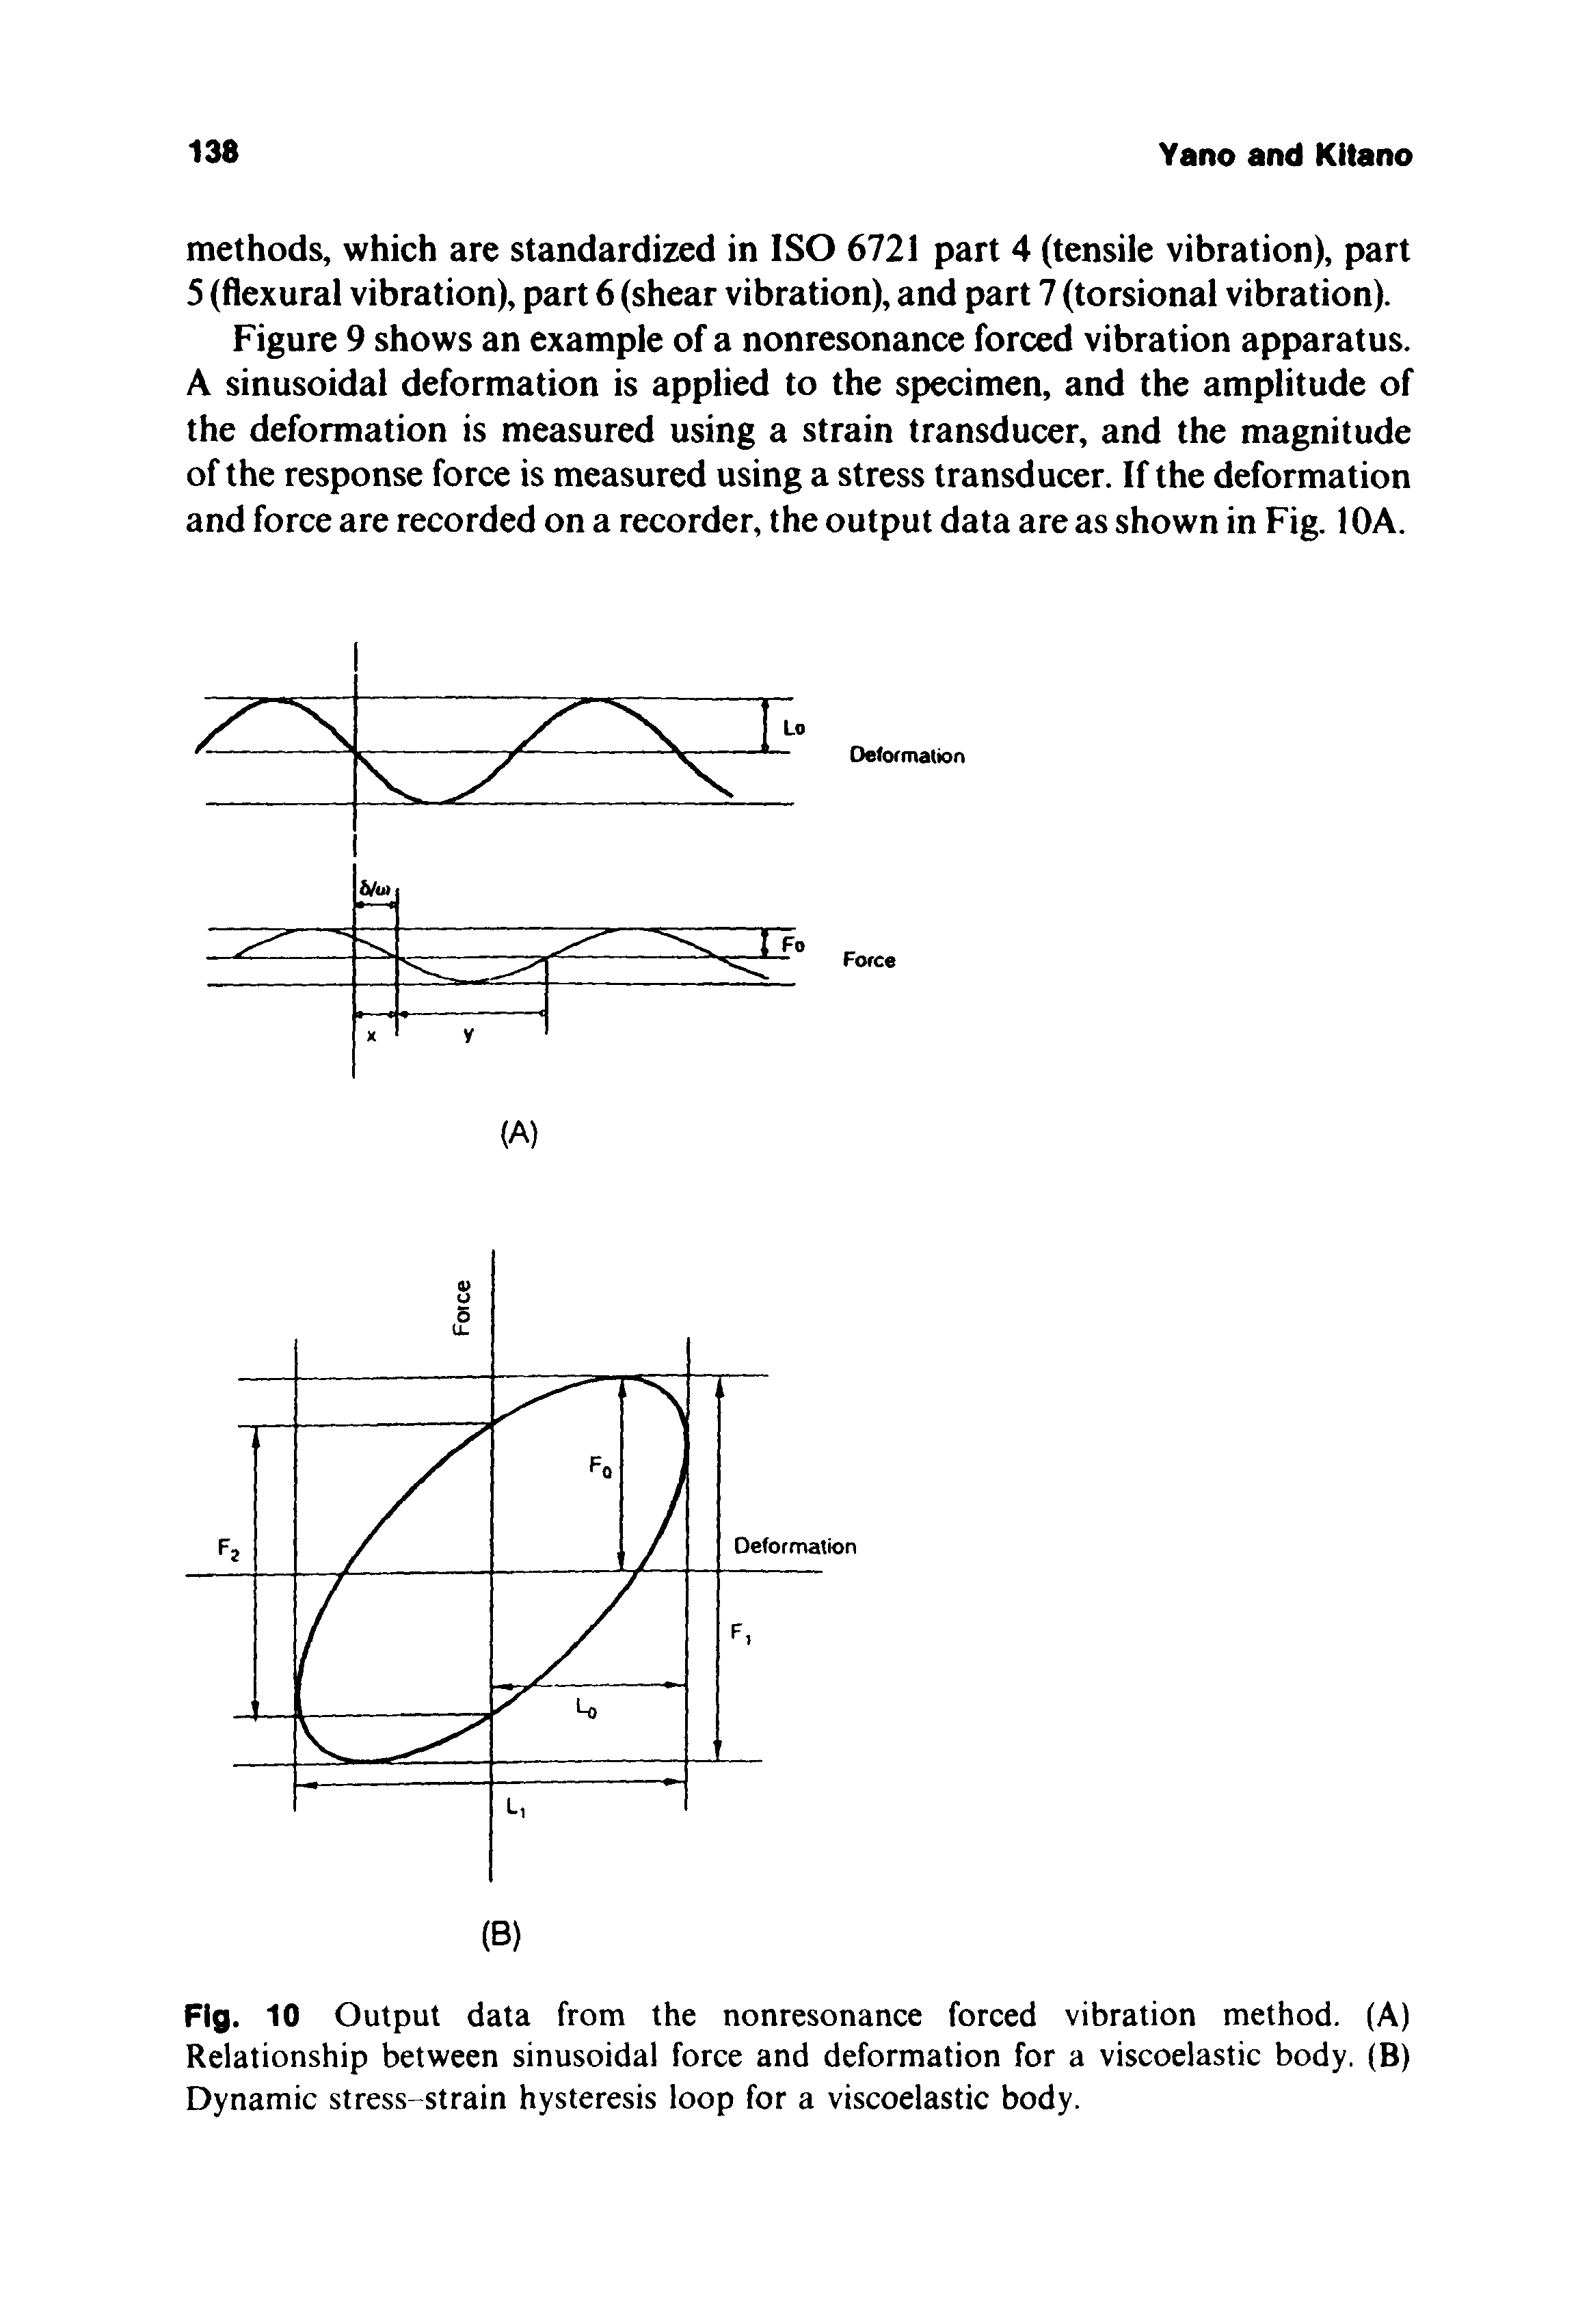 Fig. 10 Output data from the nonresonance forced vibration method. (A) Relationship between sinusoidal force and deformation for a viscoelastic body. (B) Dynamic stress-strain hysteresis loop for a viscoelastic body.